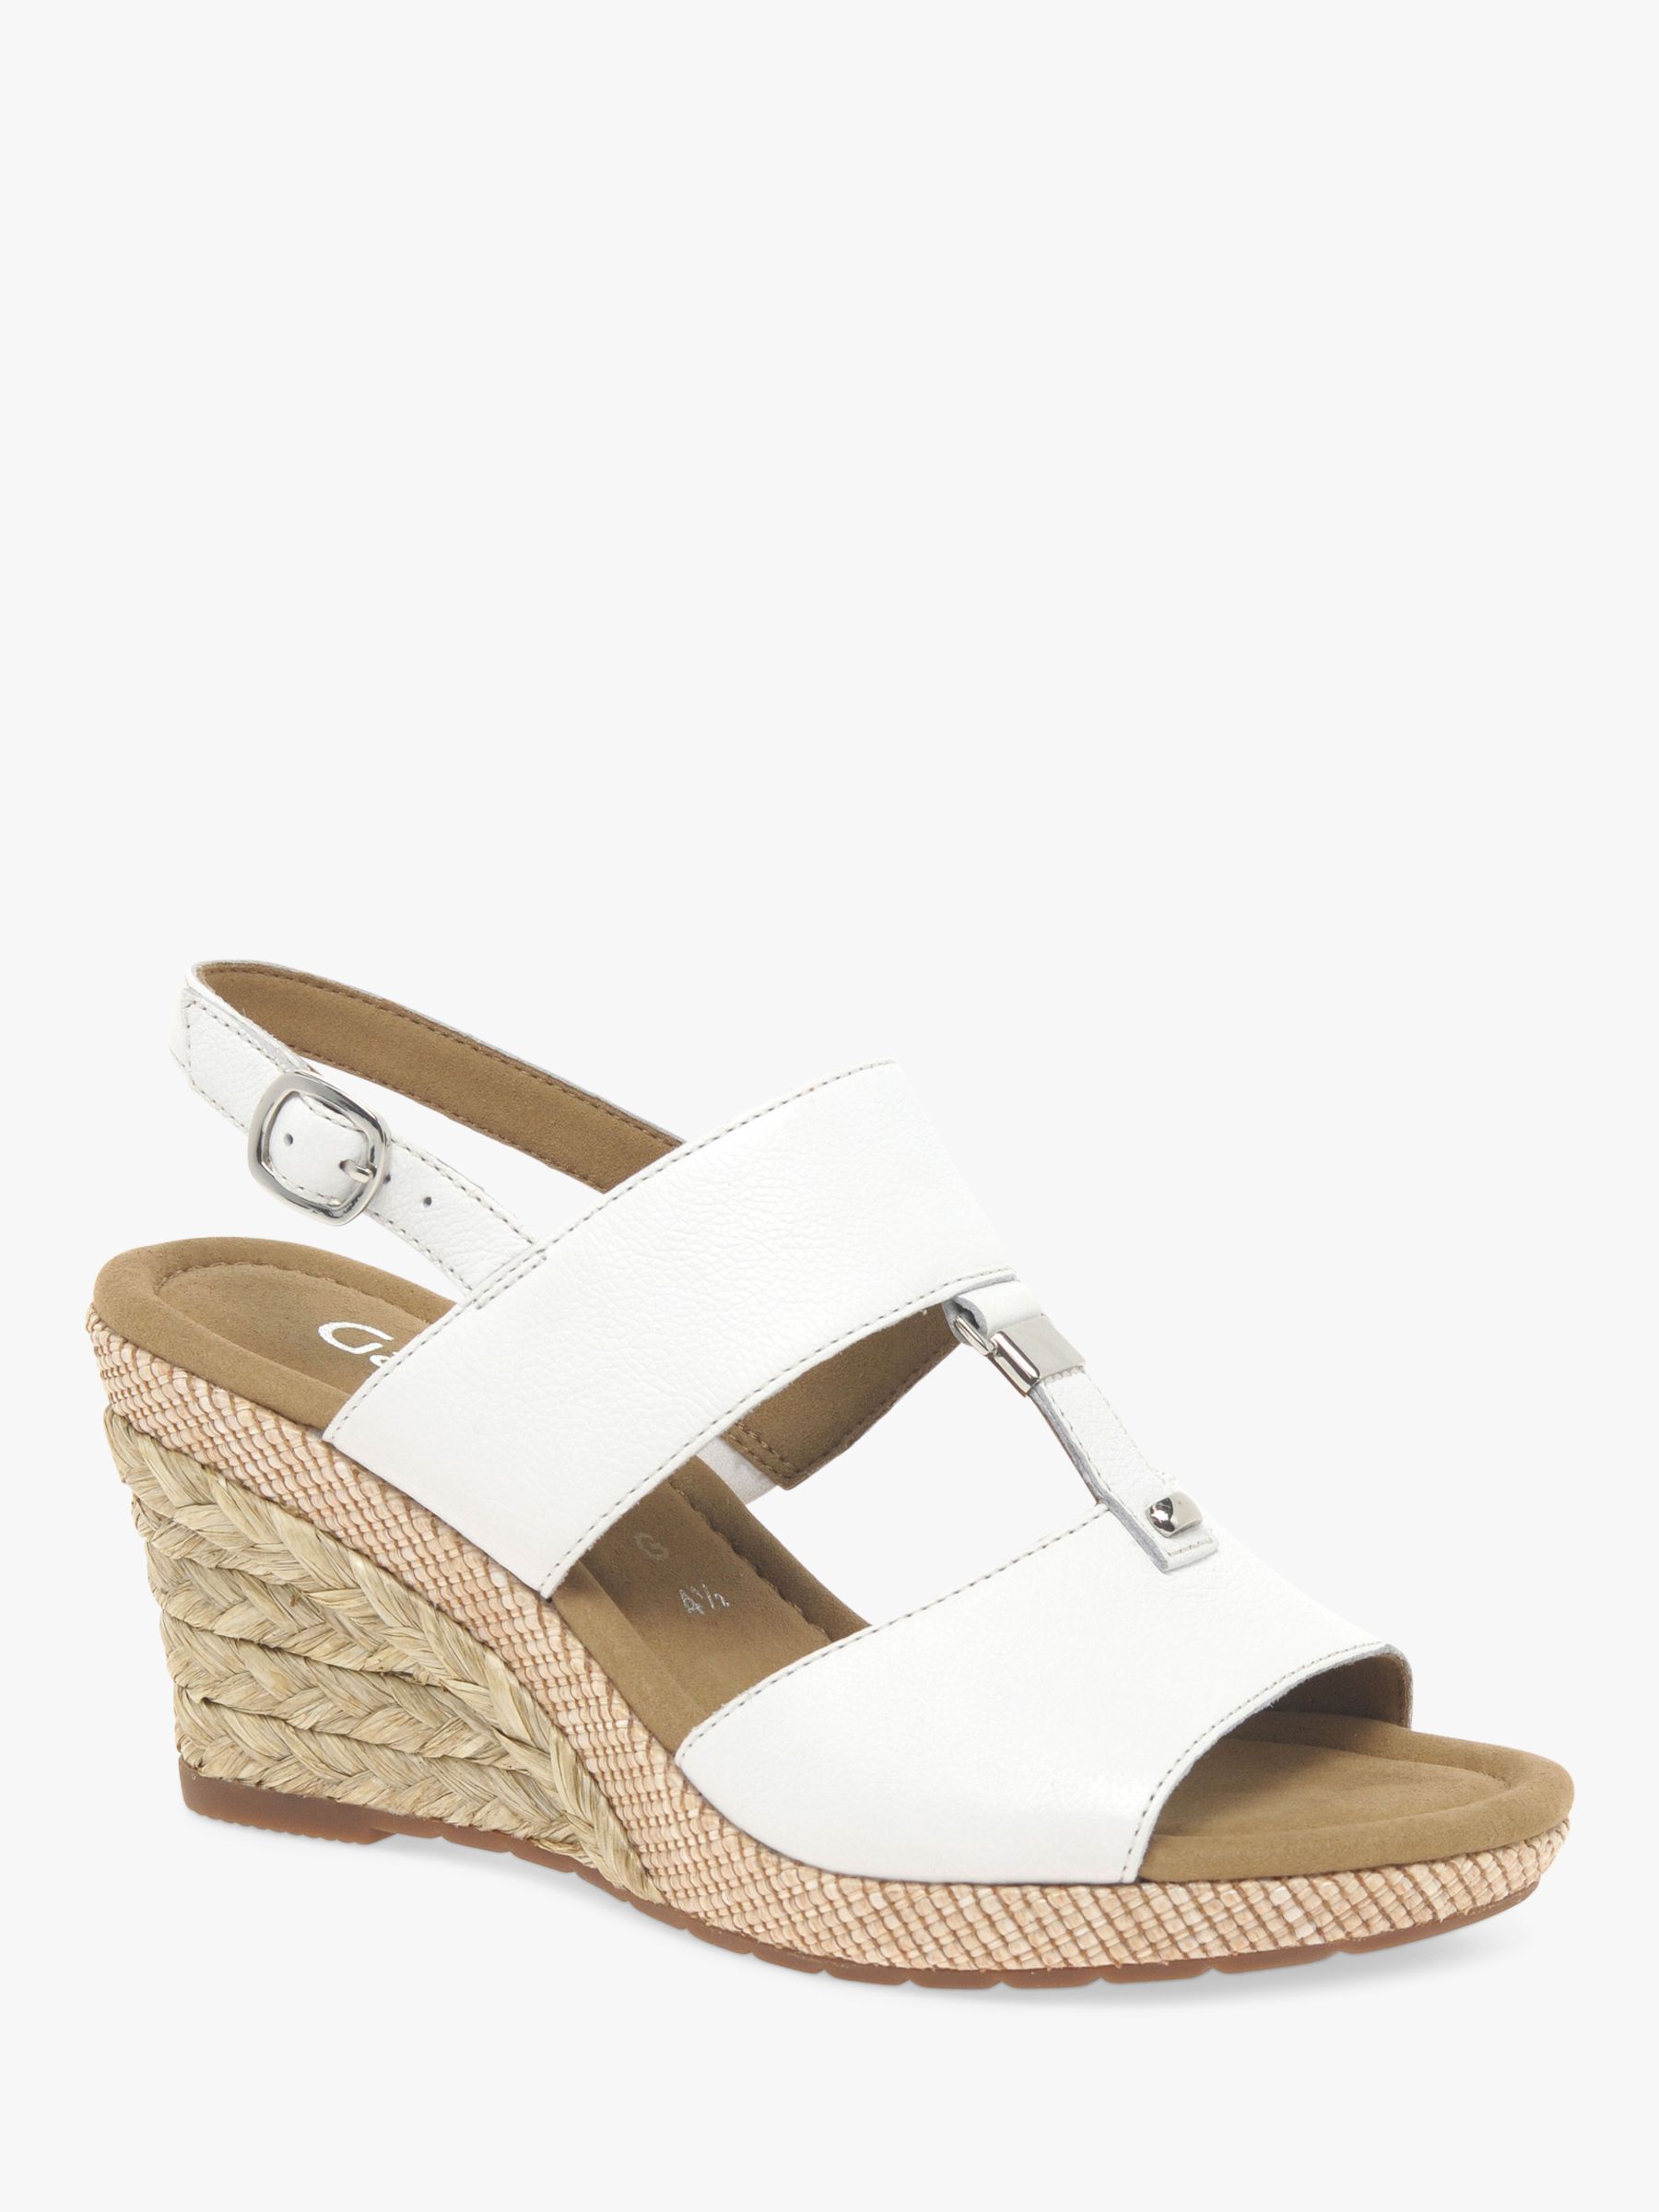 Gabor Keira Wide Fit Wedge Sandals at John Lewis & Partners